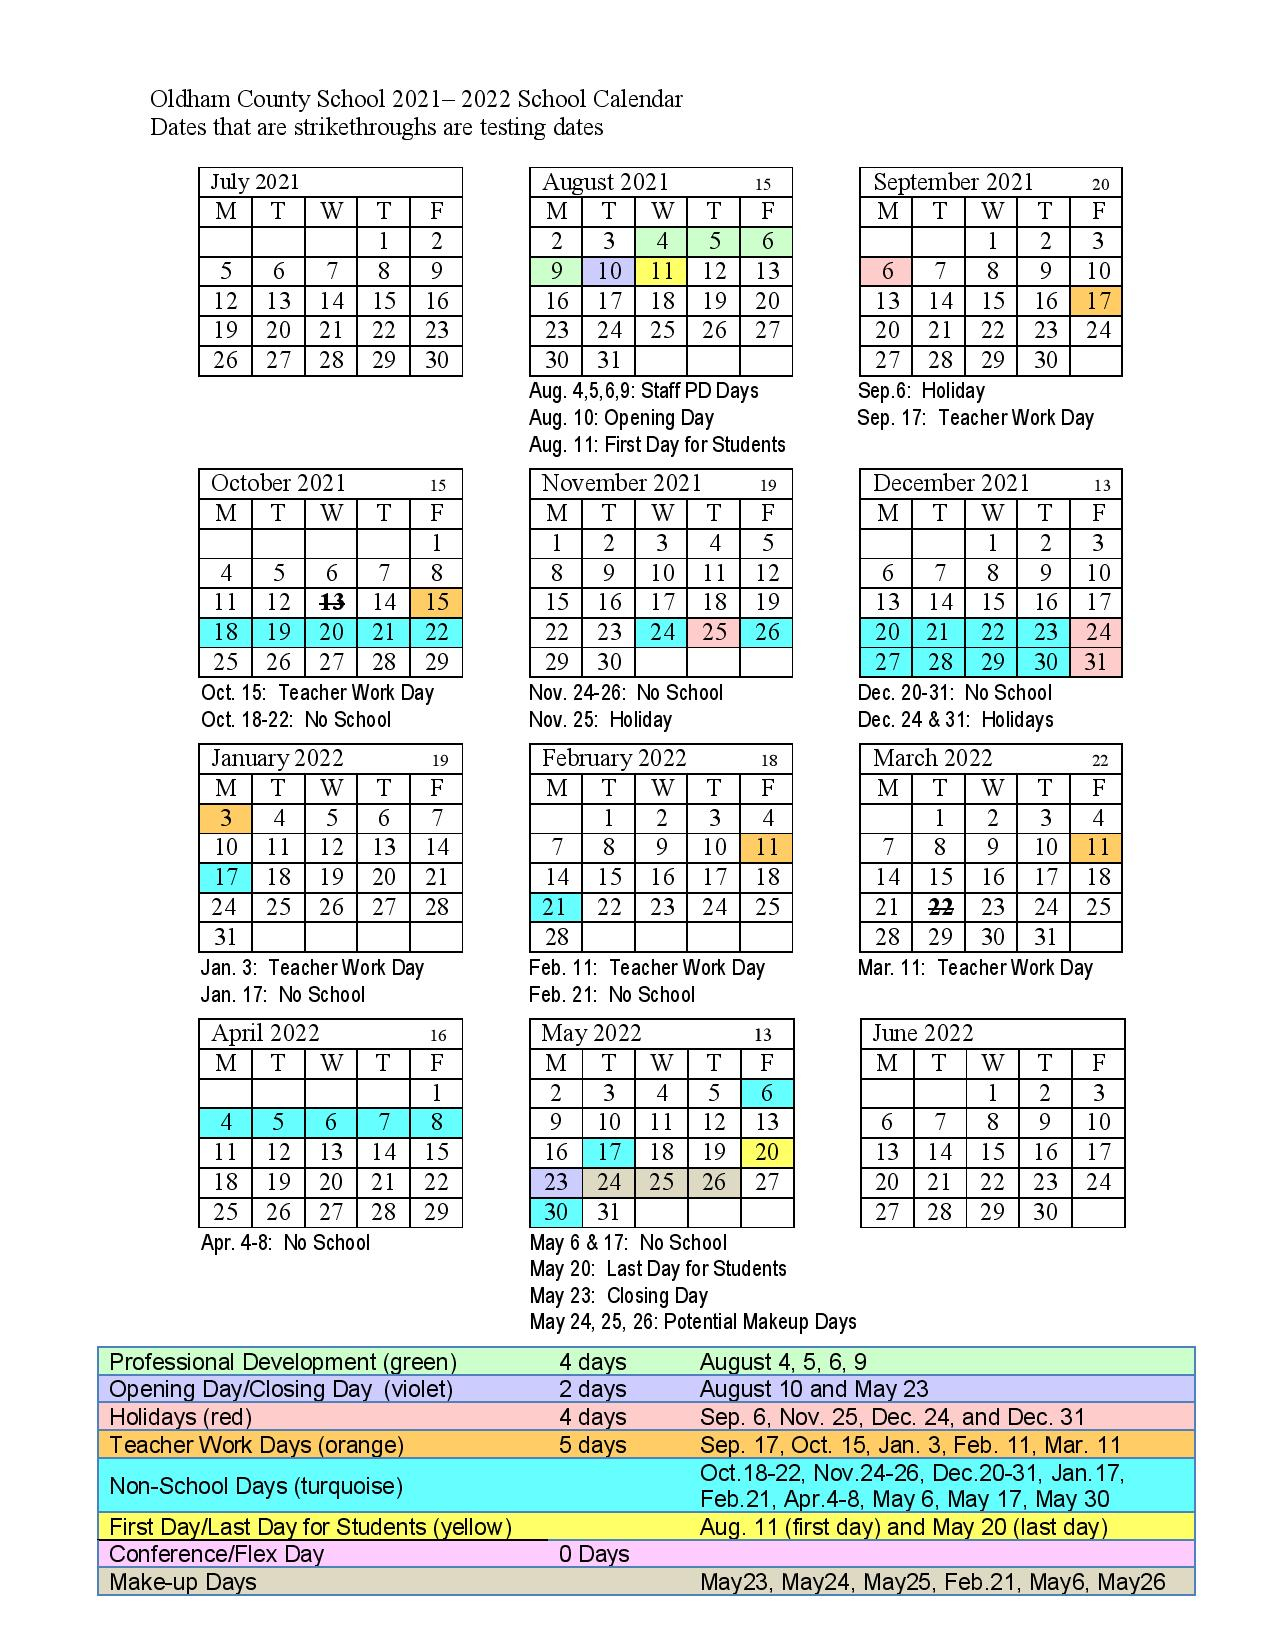 Marshall University Spring 2023 Calendar A Complete Guide August